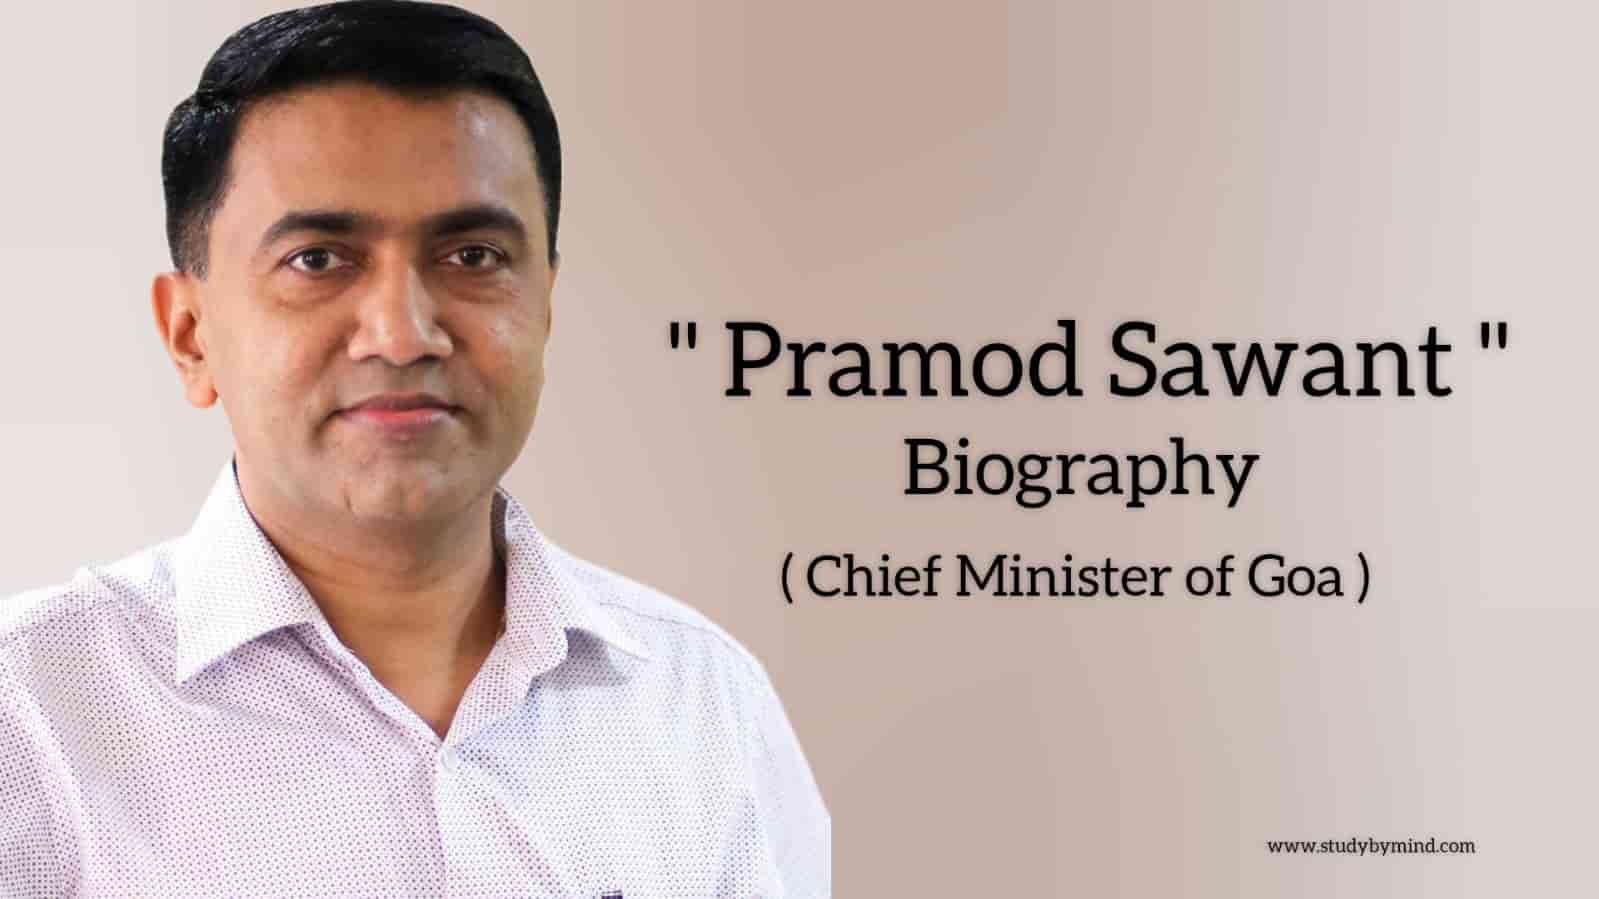 You are currently viewing Pramod sawant biography in english (Chief Minister of Goa)